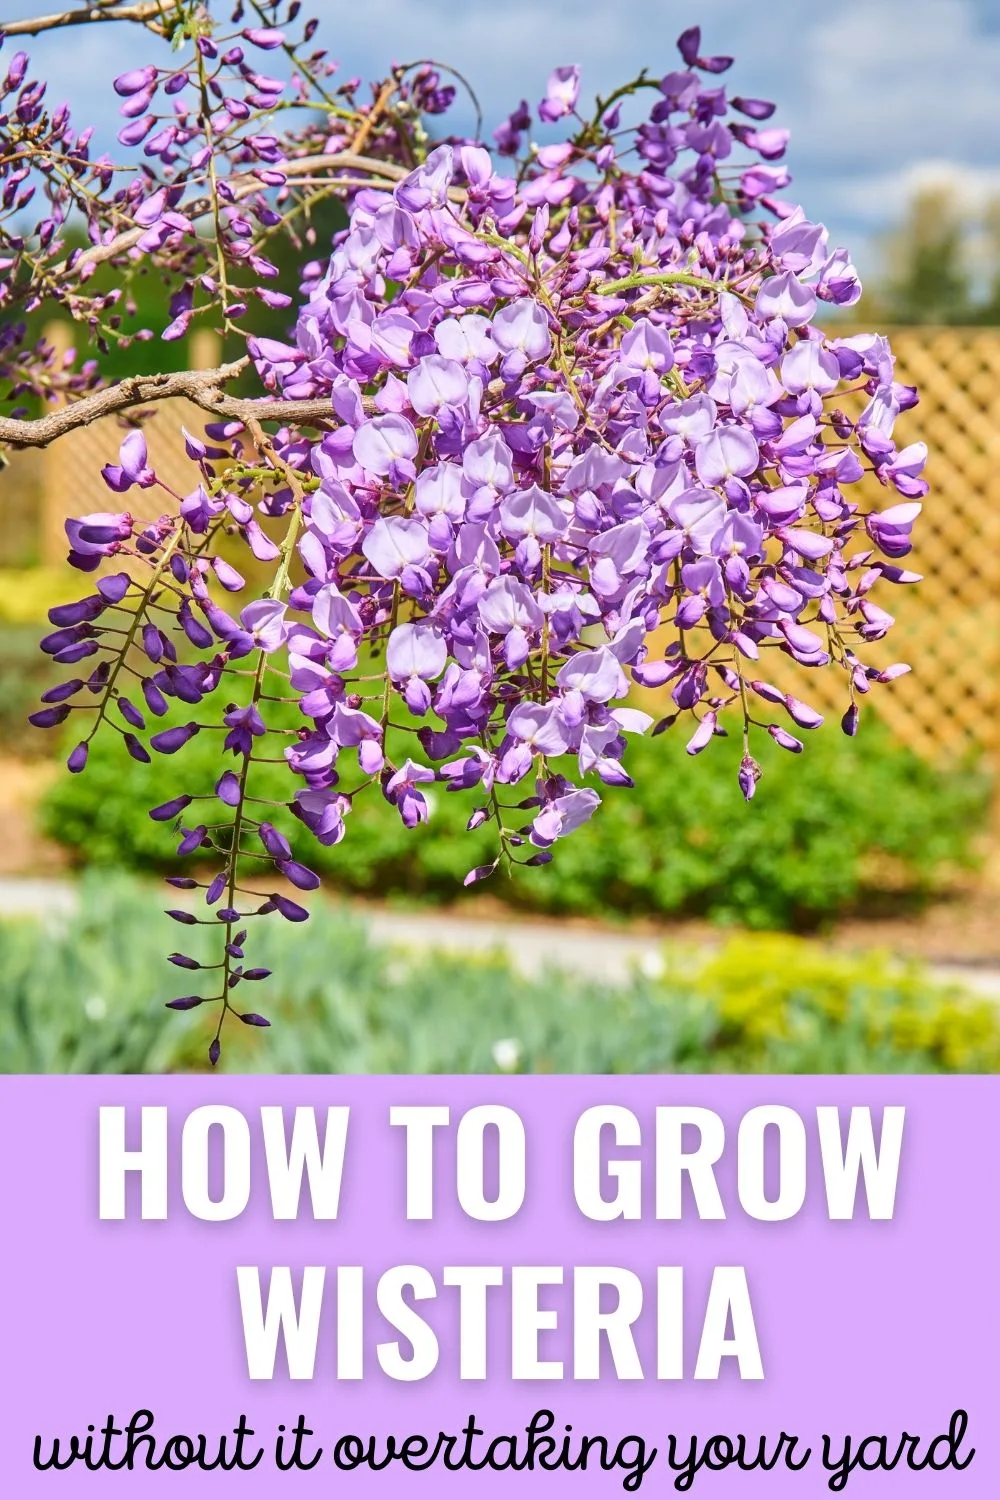 How to grow wisteria without it overtaking your yard